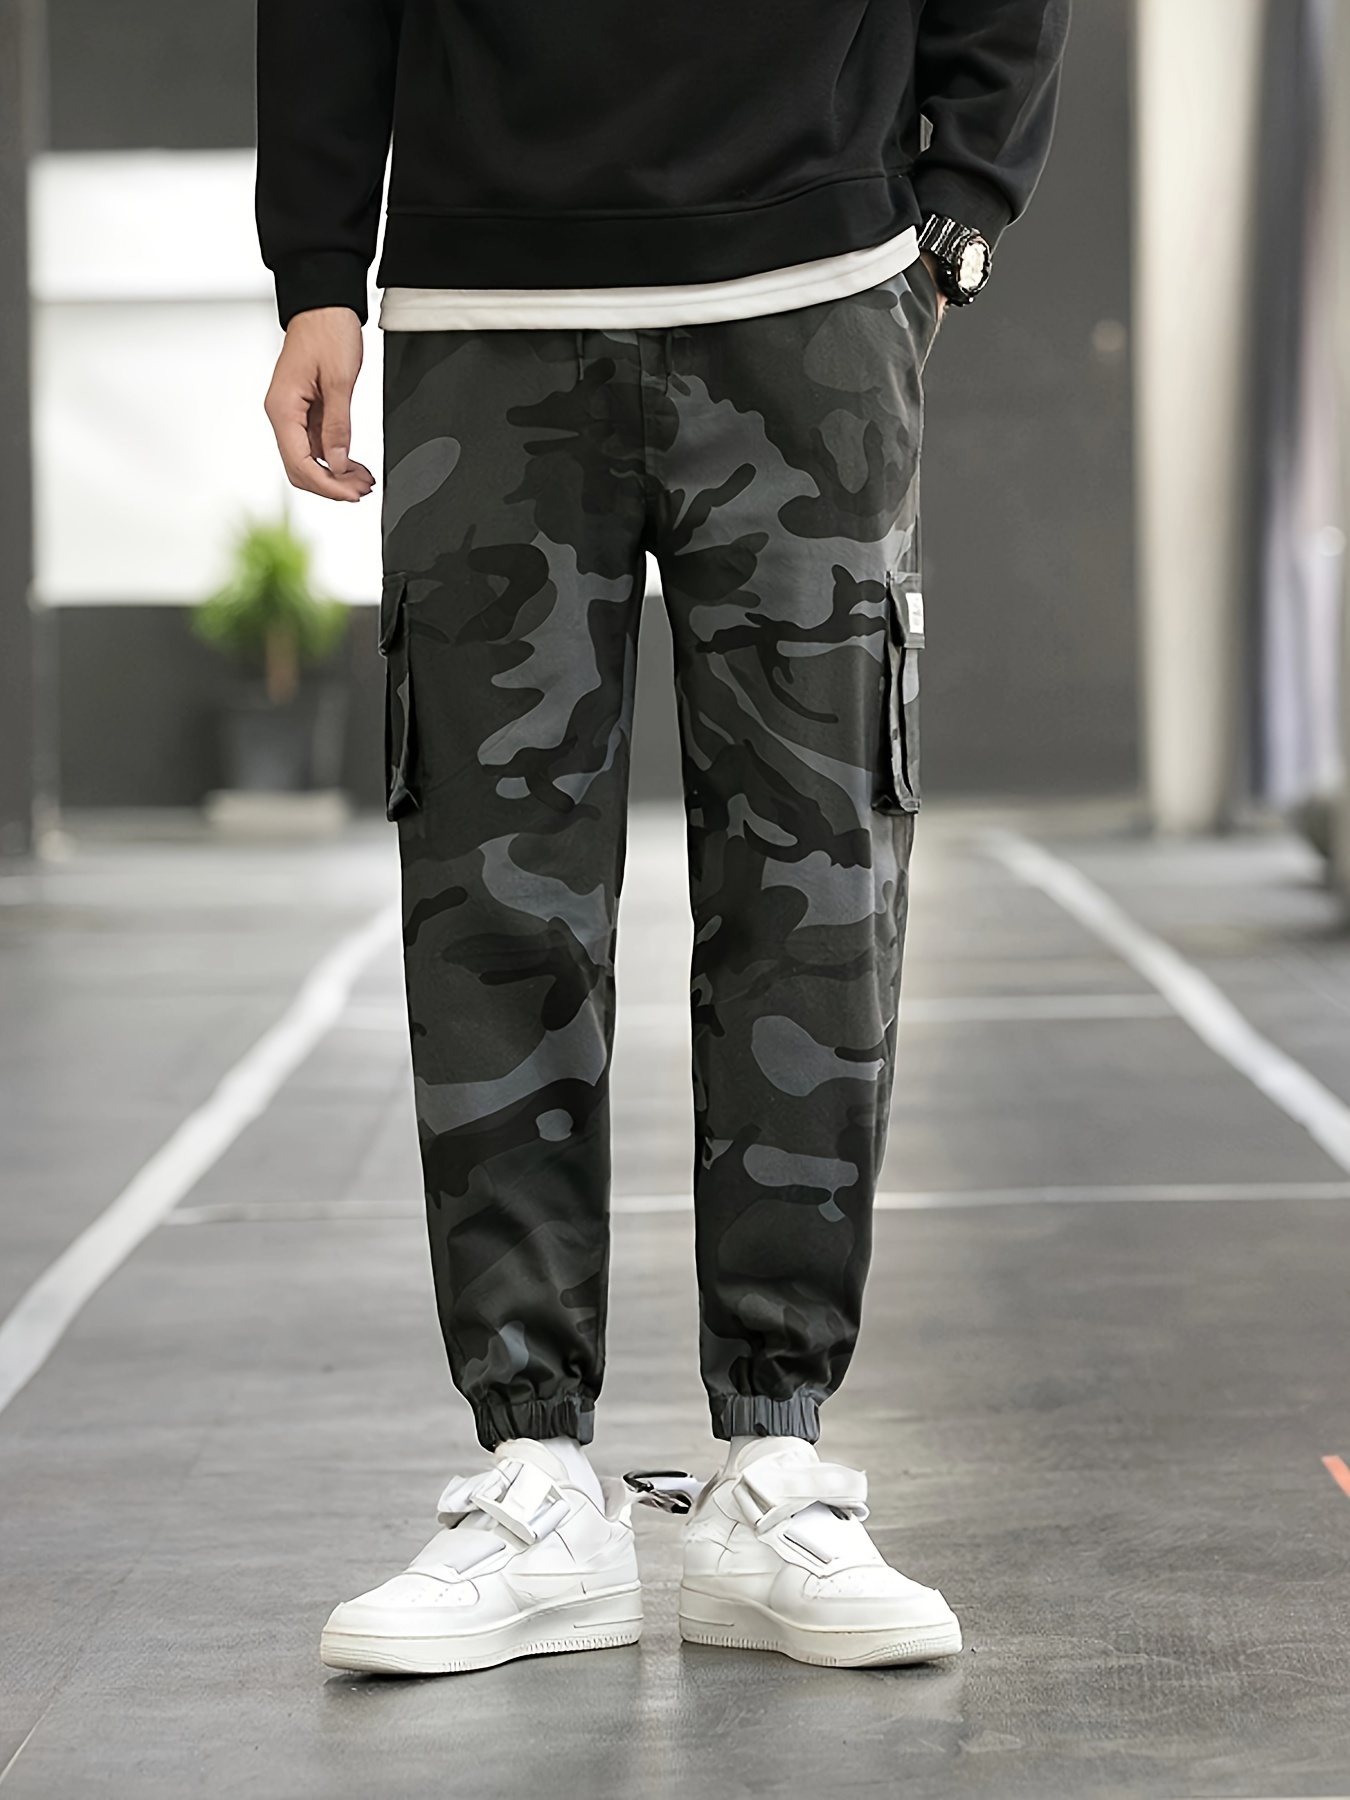 Men's Camo Cargo Pants Classic Stretch Regular Fit Ankle Length Hunting  Pant Casual Multi Pockets Military Army Work Pants